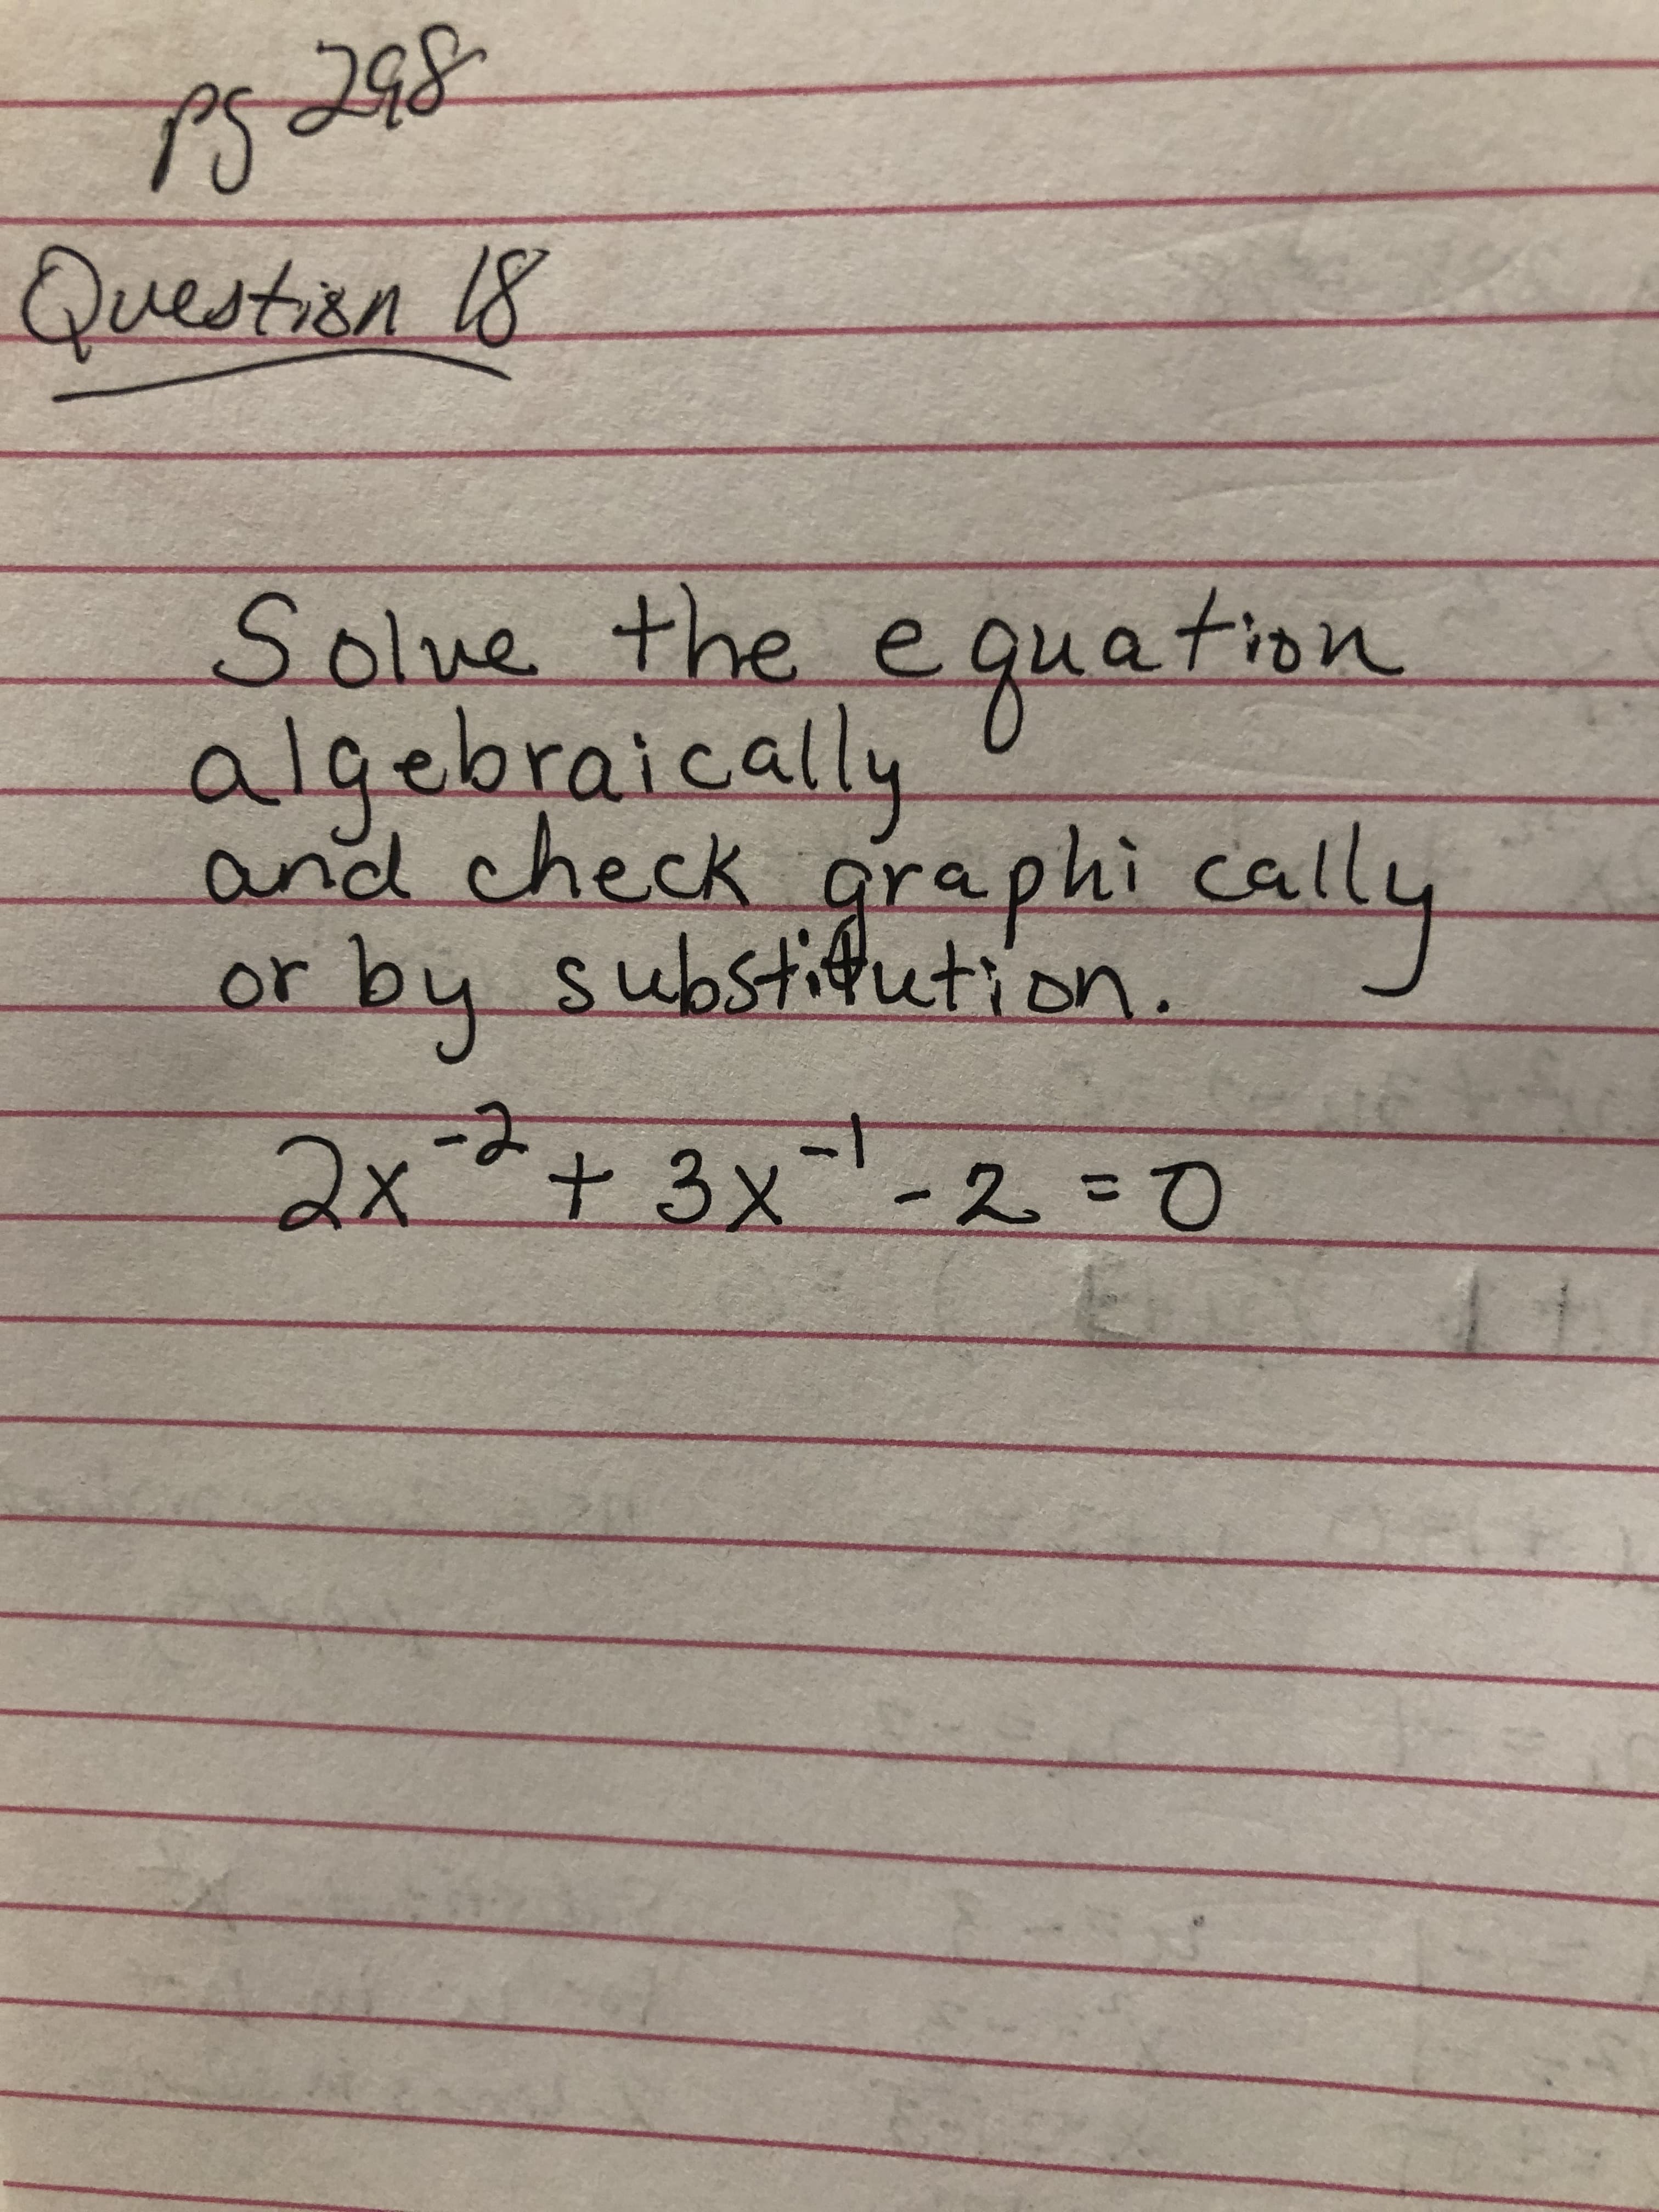 PS
ఎు
Question 18
Solue the
eguation
algebraically
and check graphi cally
rby substifution.
-2
2x+3x¯'-2=0
